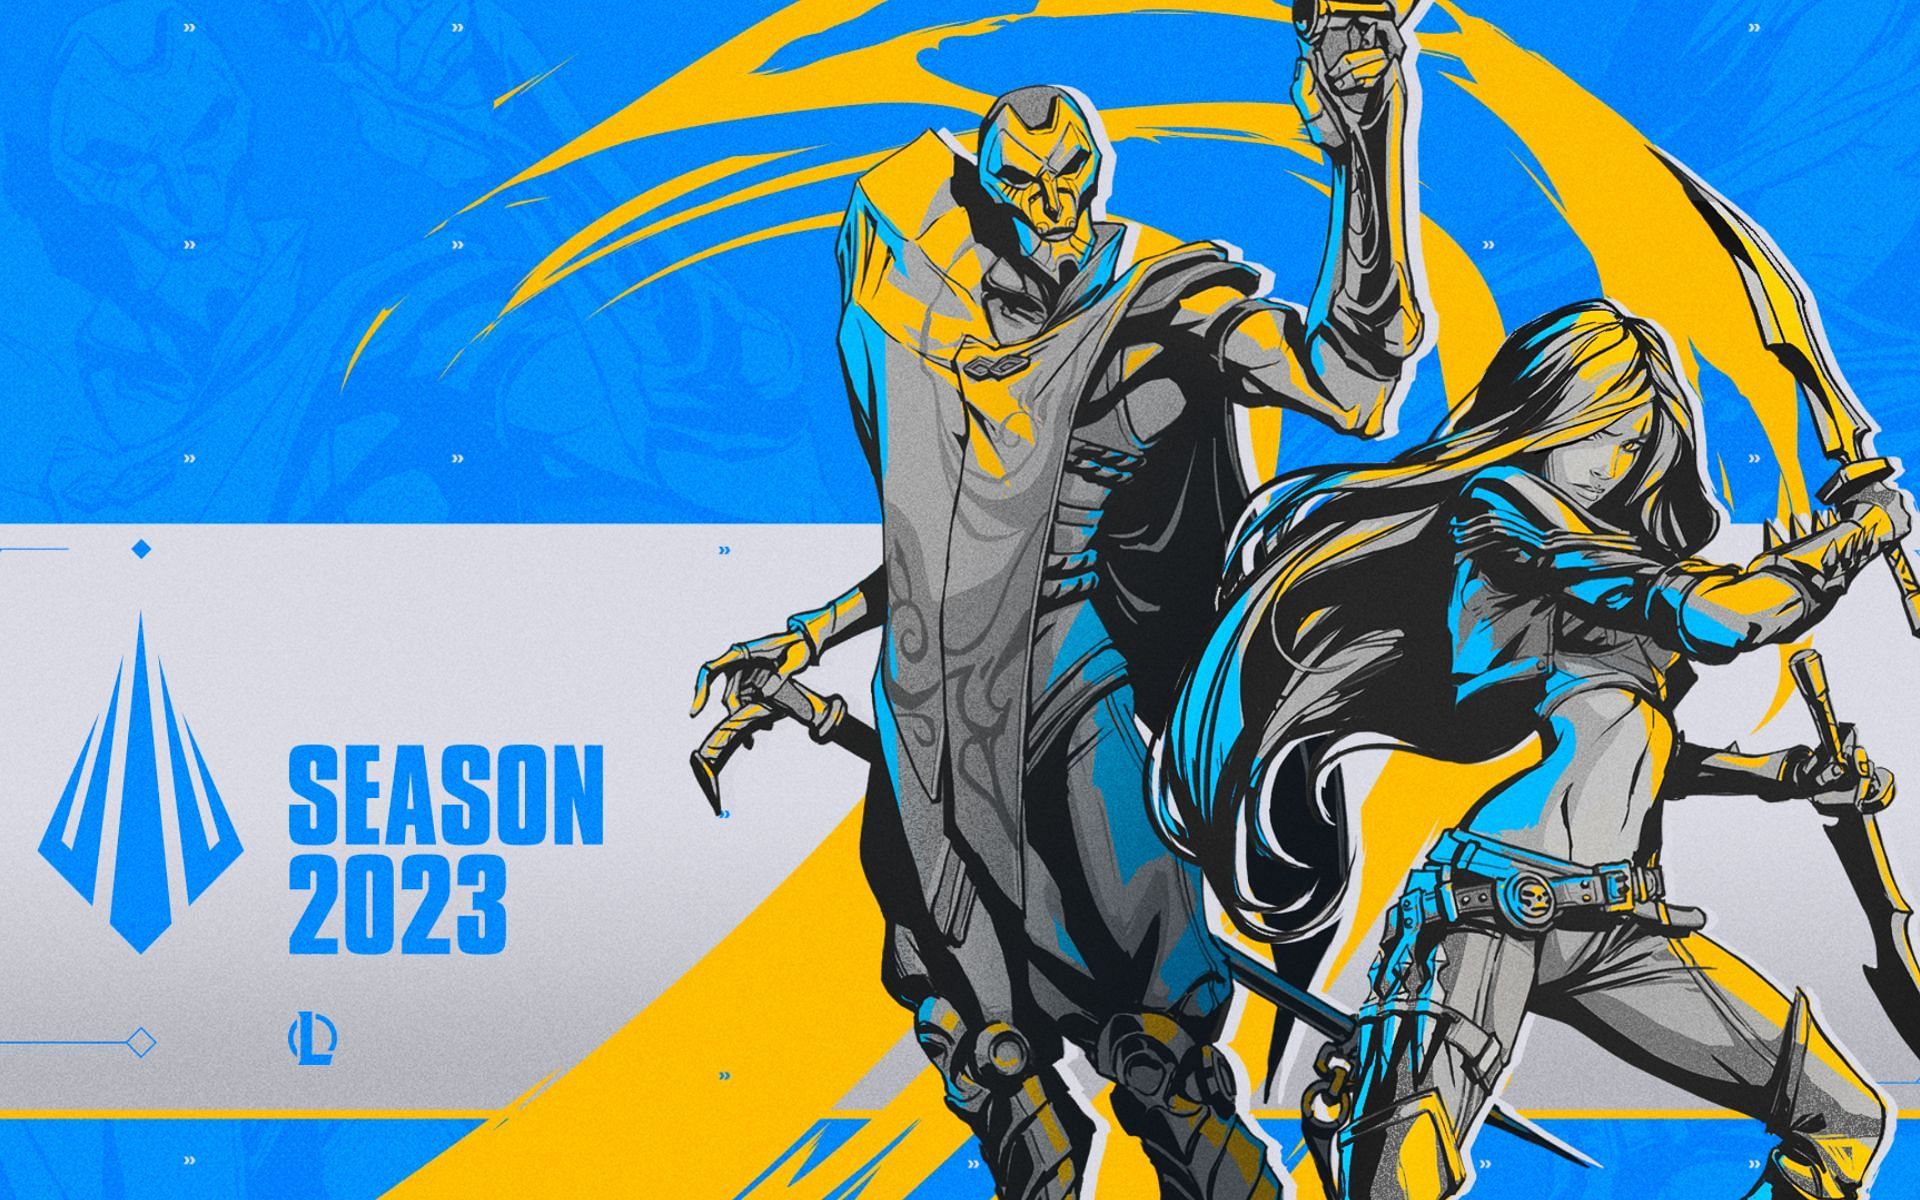 League of Legends Season 2023 Ranked Changes: Mid-year reset, rewards and more